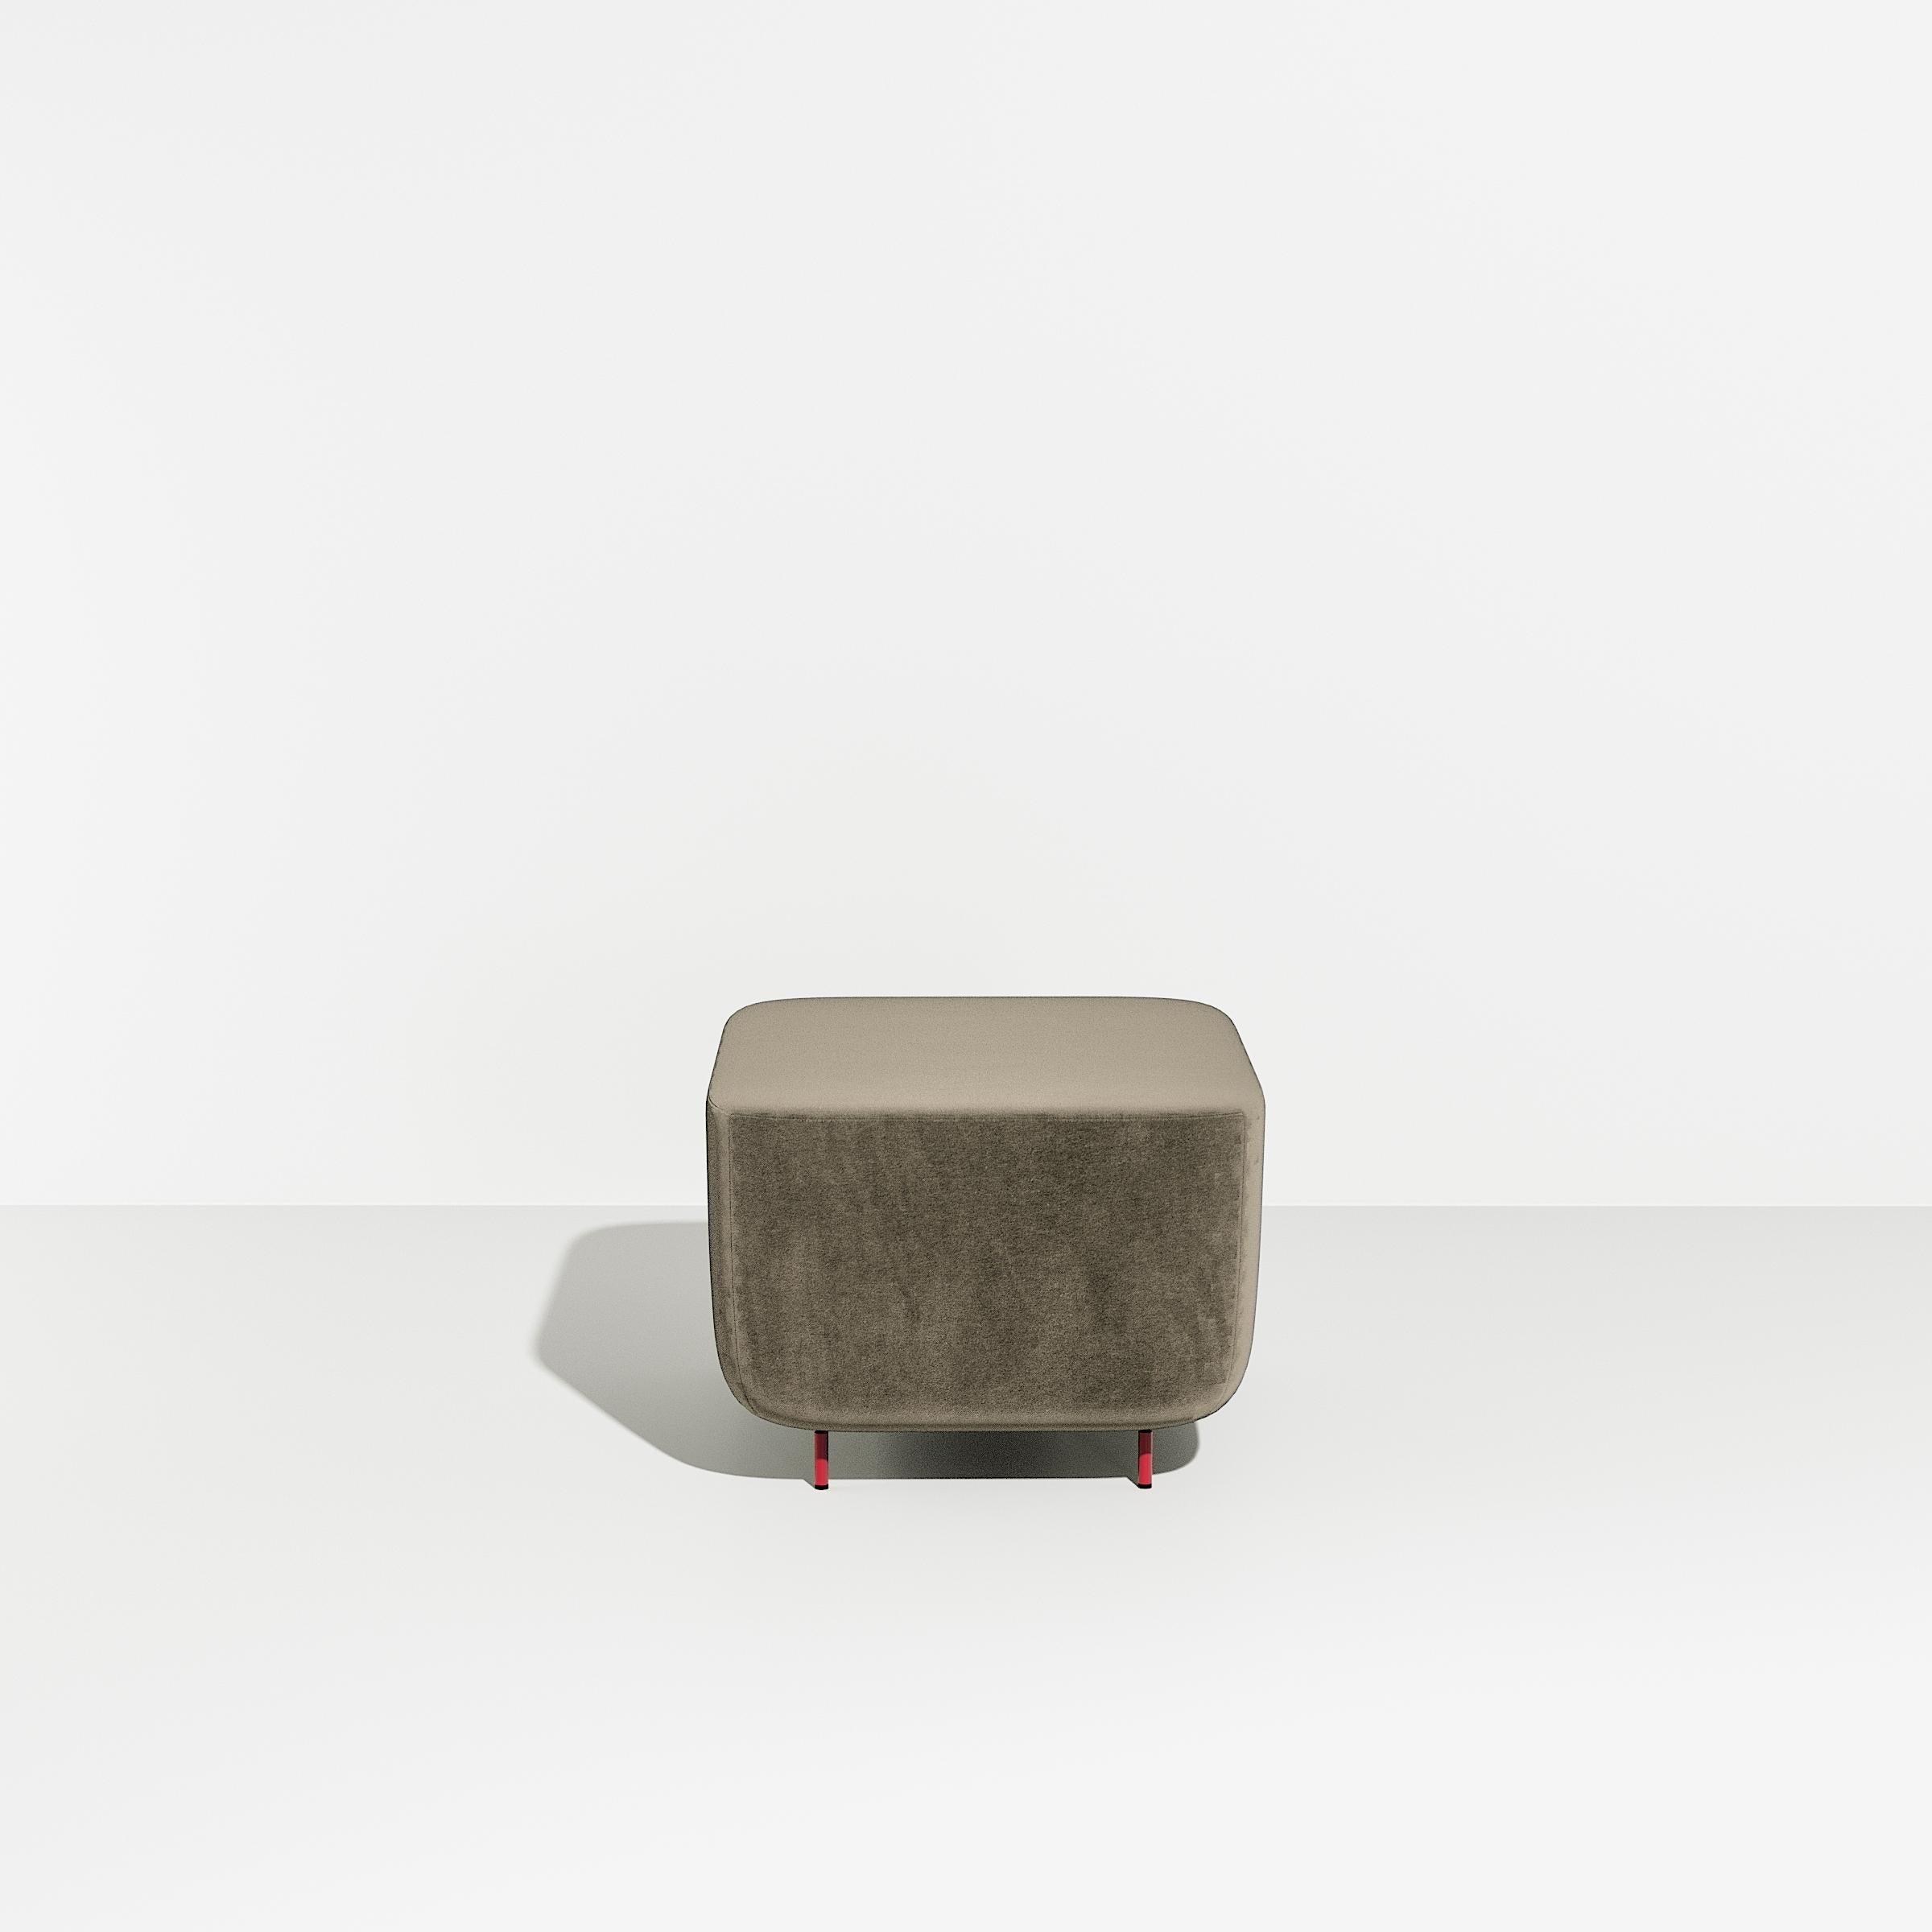 Petite Friture Small Hoff Stool in Grey-beige by Morten & Jonas, 2015

Hoff created by designer duo Morten & Jonas is a collection of two modular stools and two modular armchairs. they can combine to make a sofa as well an entire living room area.